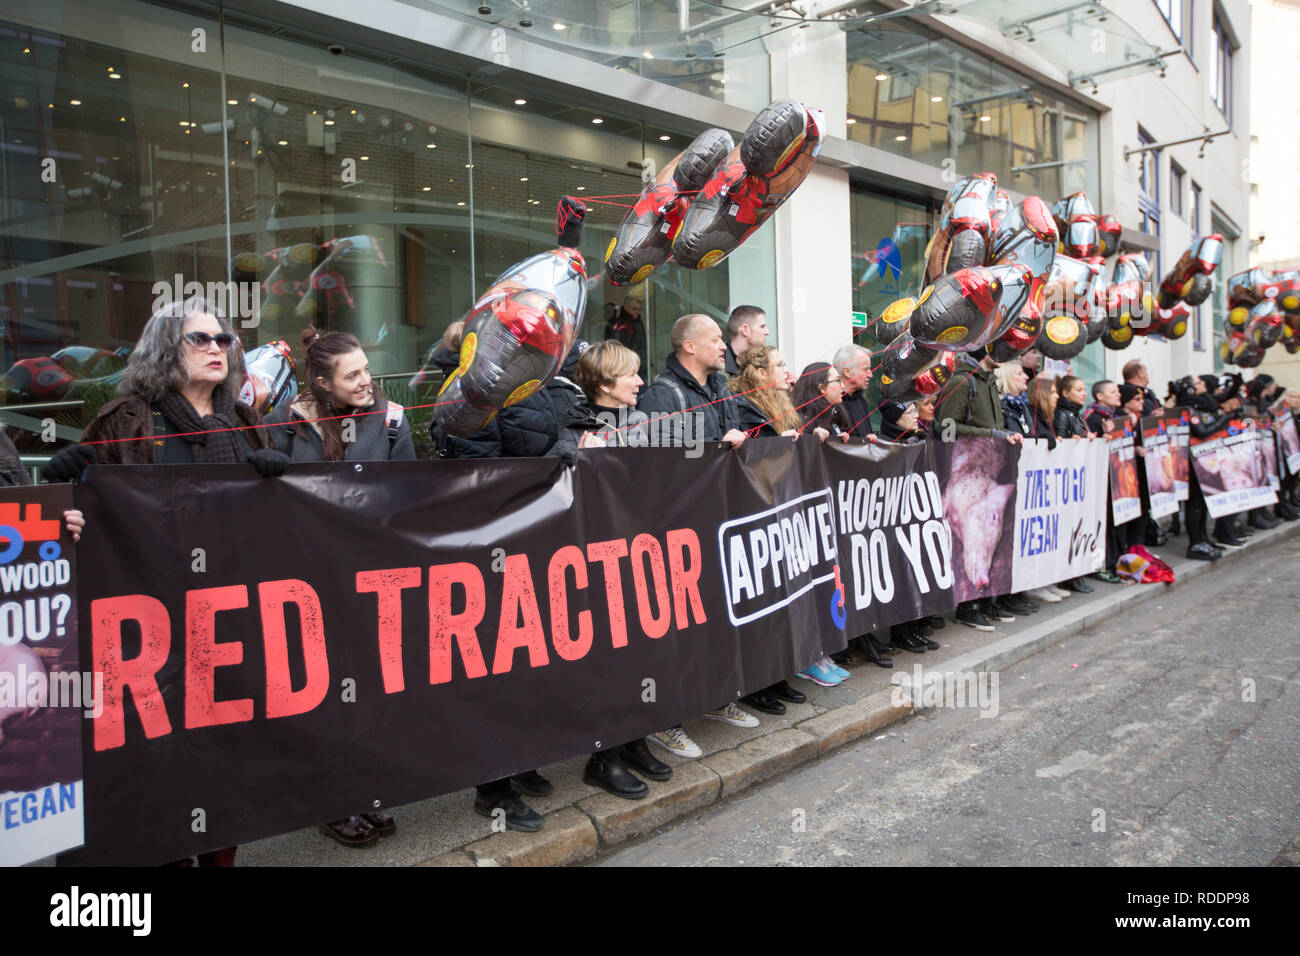 London, UK. 18th Jan 2019. Vegan activists protest Red Tractors practices in London Credit: George Cracknell Wright/Alamy Live News Stock Photo